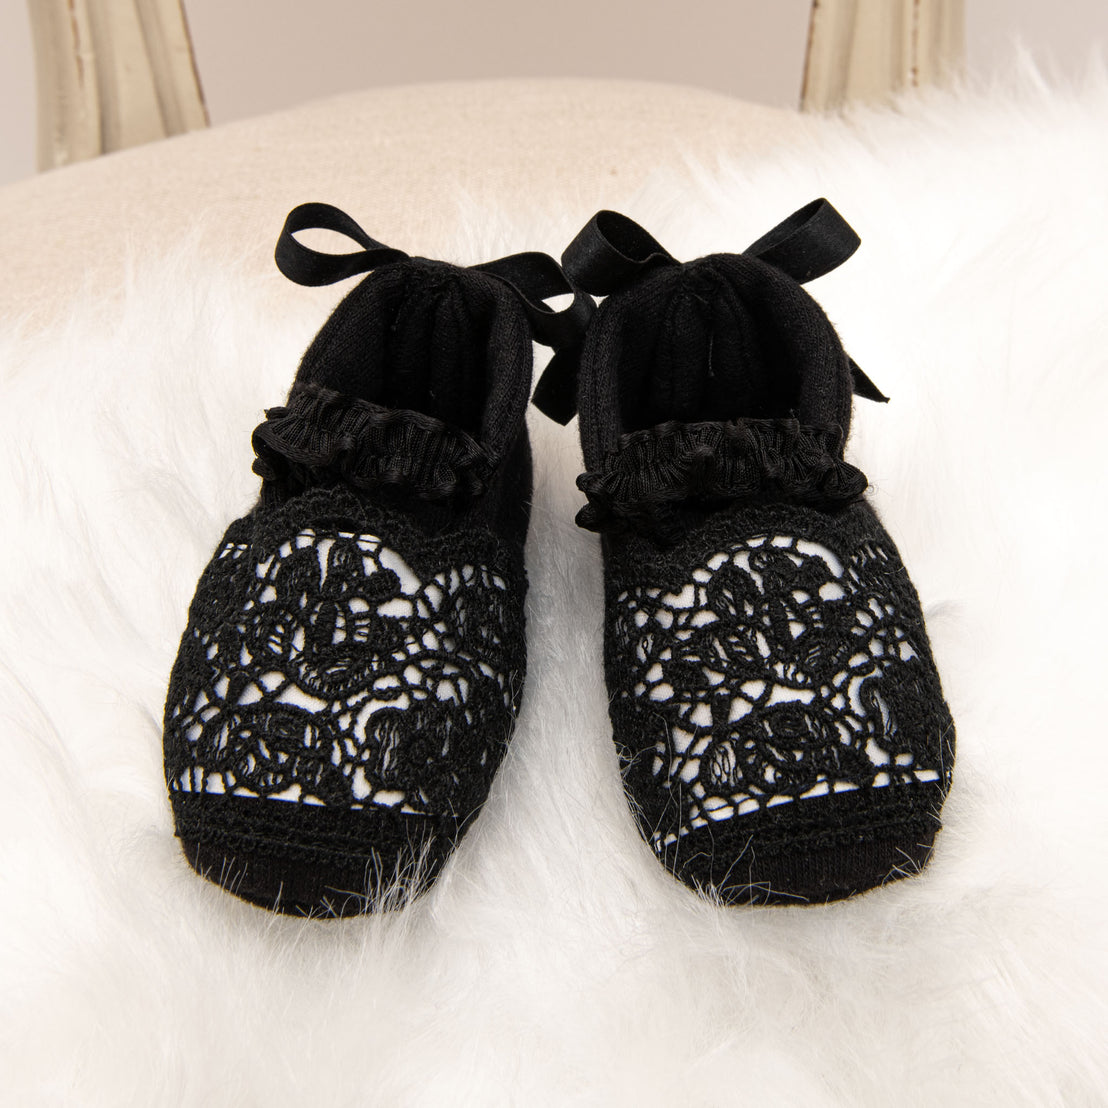 A pair of stylish black June Booties with ribbon ties, displayed on a fluffy white surface.